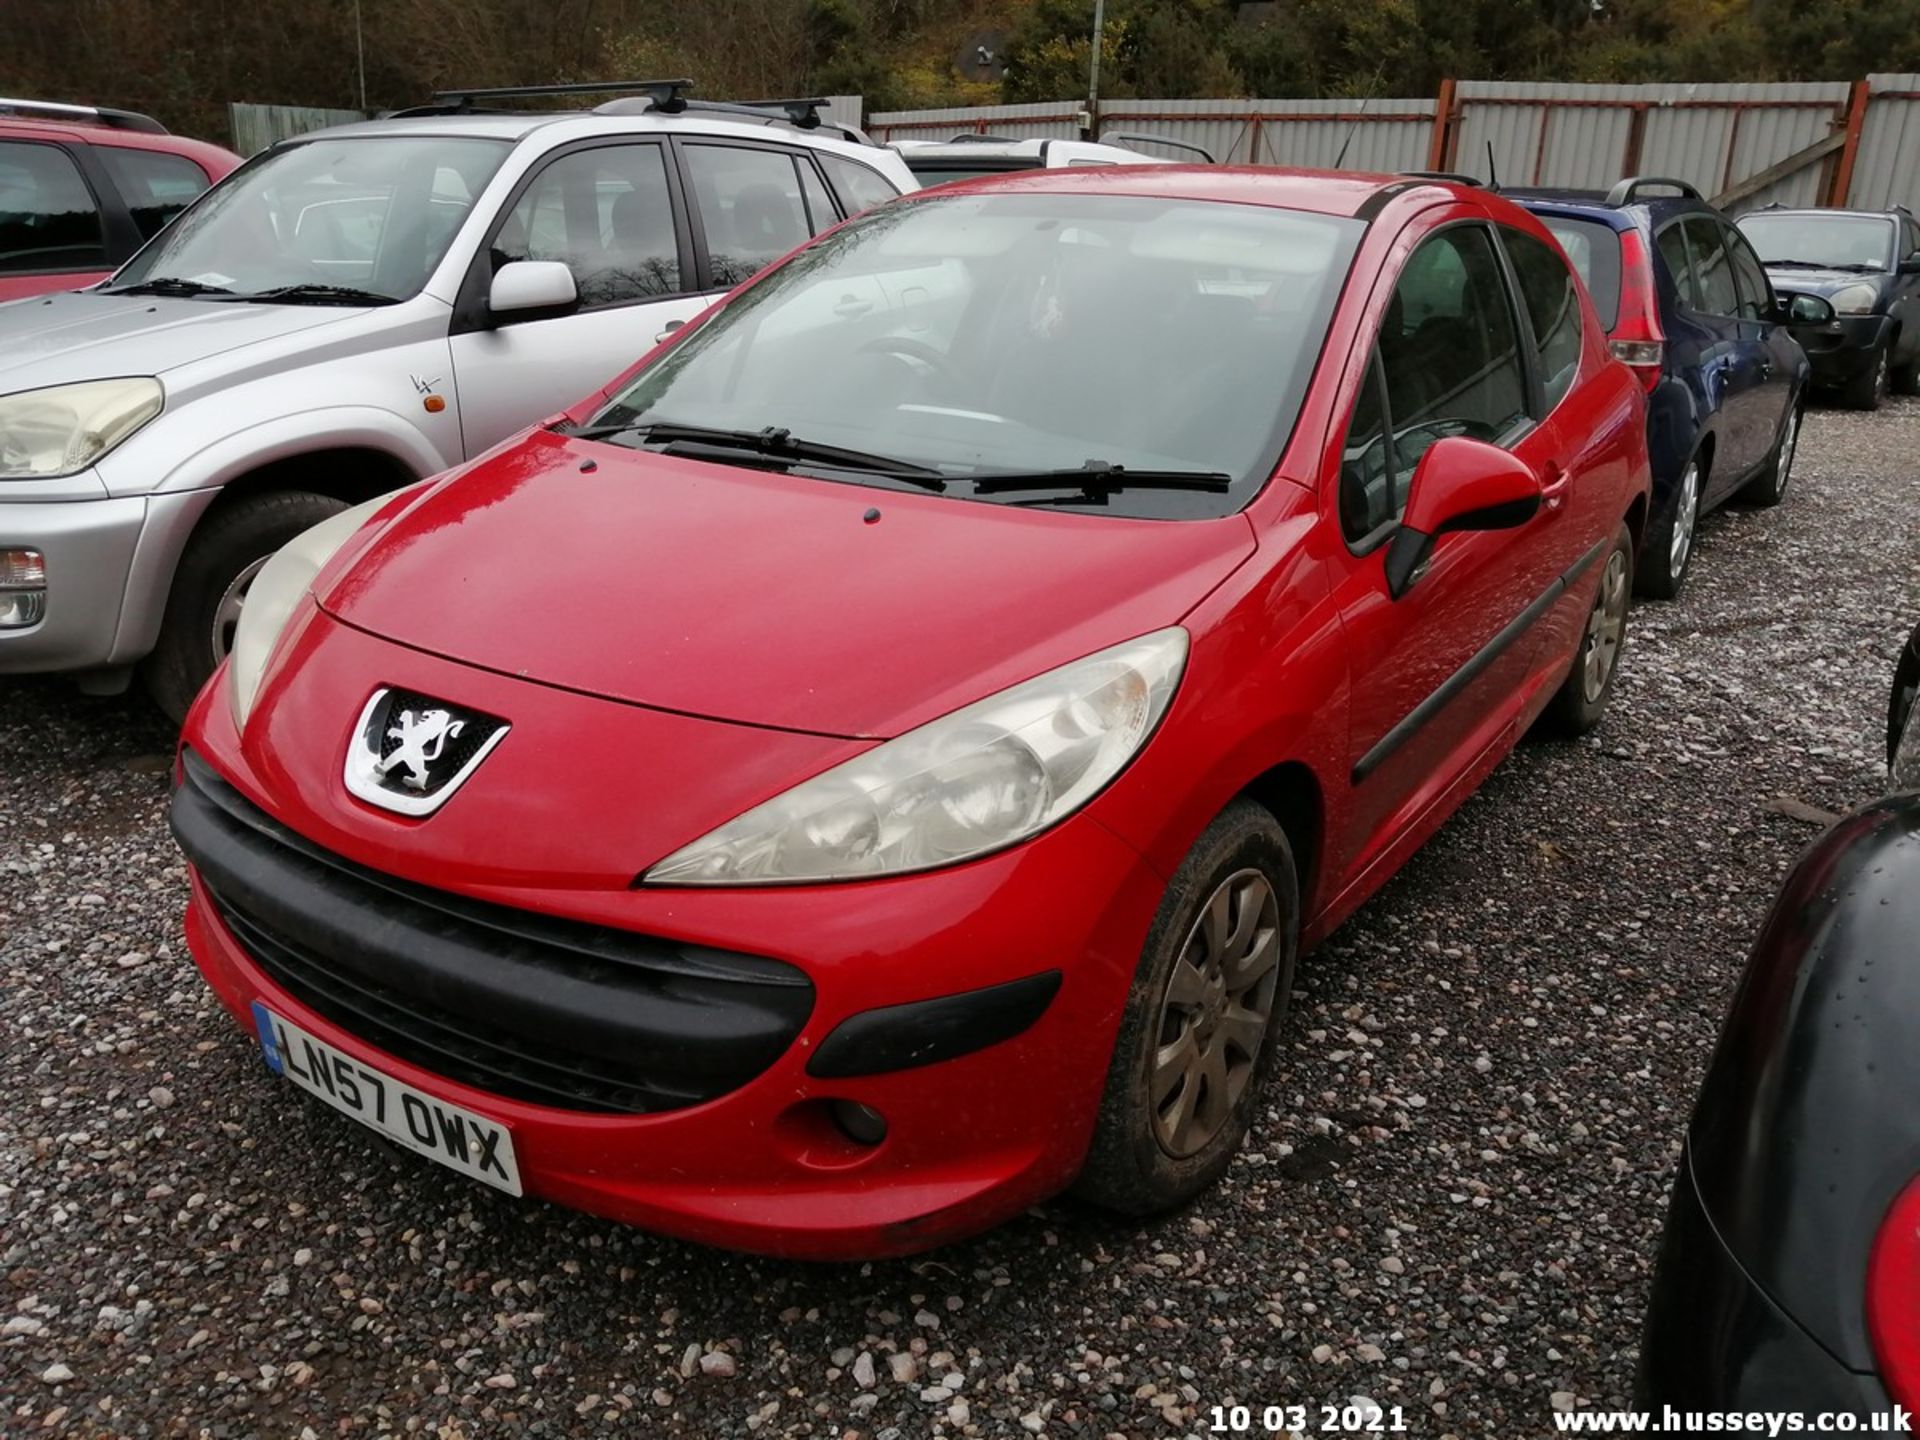 07/57 PEUGEOT 207 S HDI 67 - 1398cc 3dr Hatchback (Red) - Image 2 of 11